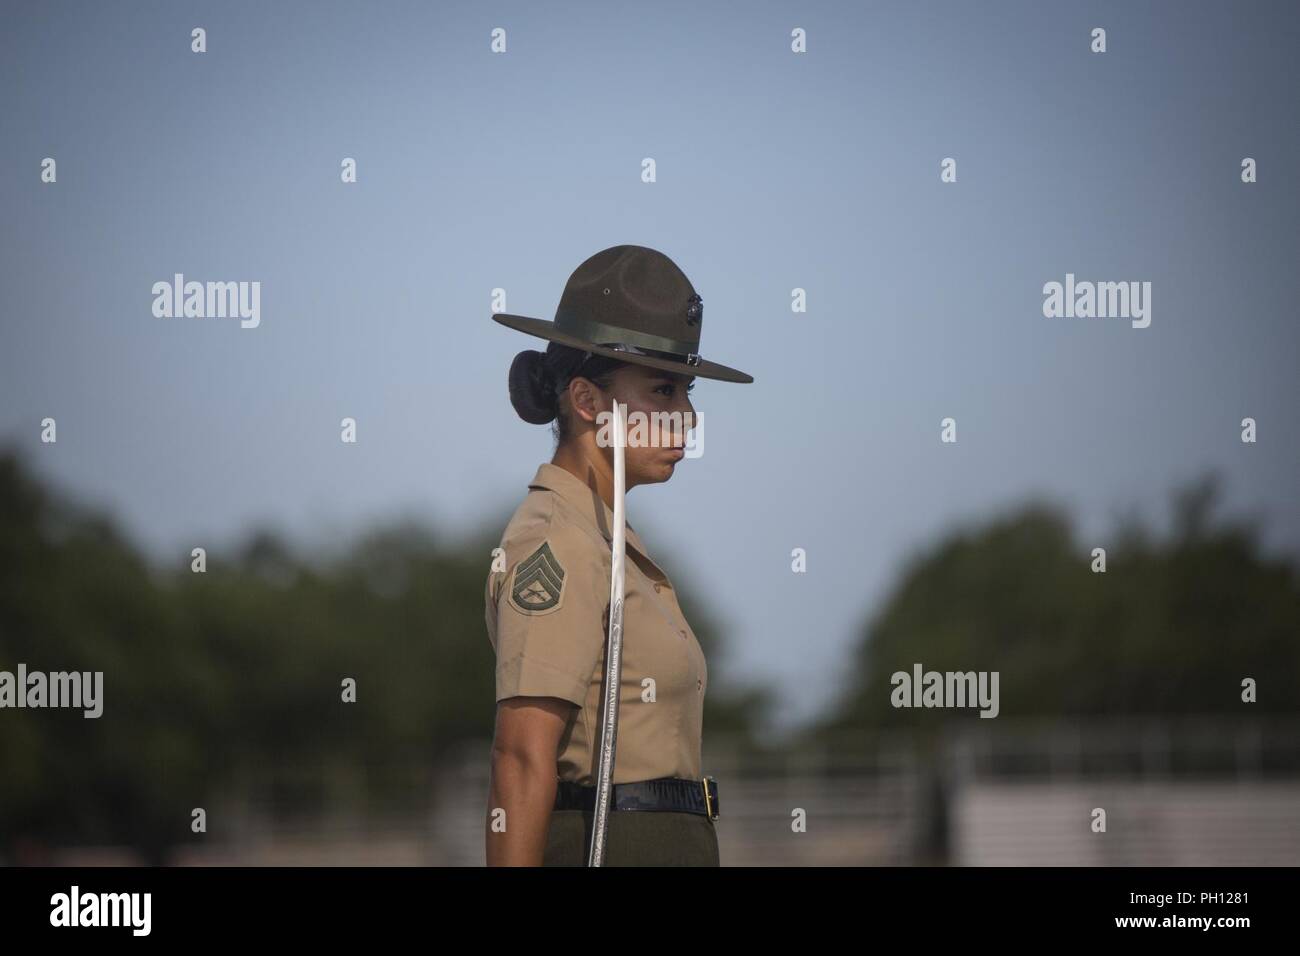 U.S. Marine Corps Drill Instructor Staff Sgt. Dalia Chavez prepares to give commands to Platoon 4030, Papa Company, 4th Recruit Training Battalion during an initial drill evaluation June 25, 2018, on Parris Island, S.C. Drill instructors are evaluated on their appearance, sword control and cadence during the evaluation. Papa Company is scheduled to graduate August 24, 2018. Parris Island has been the site of Marine Corps recruit training since Nov. 1, 1915. Today, approximately 19,000 recruits come to Parris Island annually for the chance to become United States Marines by enduring 13 weeks of Stock Photo